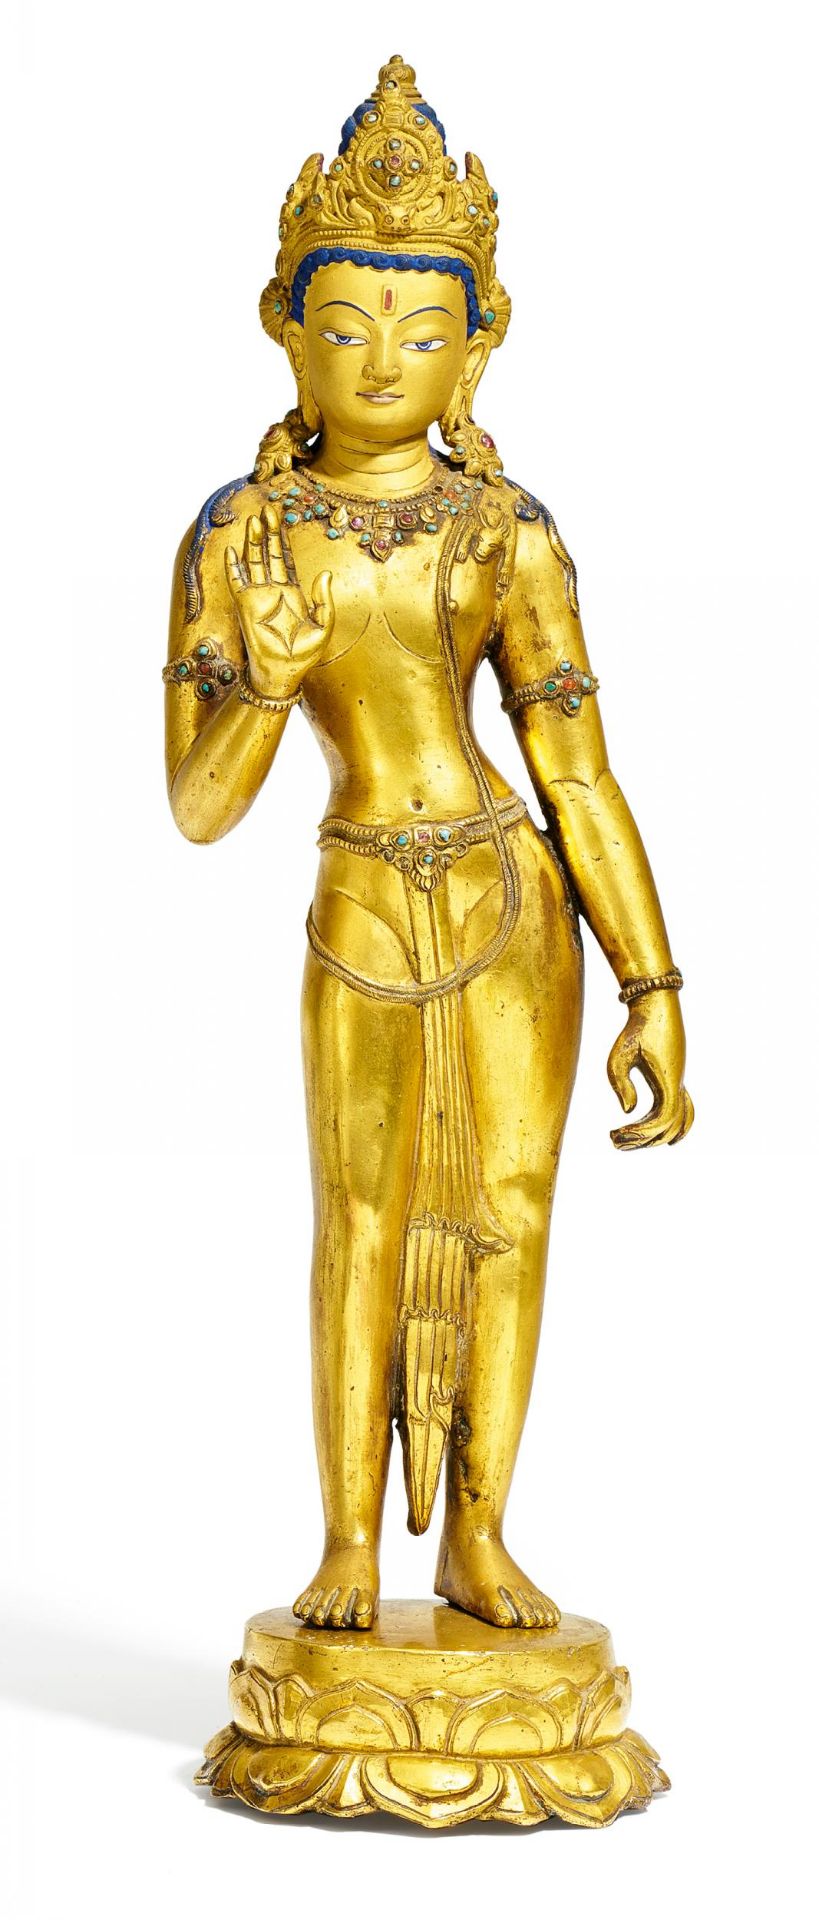 STANDING AVALOKITESHVARA. Nepal. Bronze with gilding, gold painting, pigments and stone inlays. In